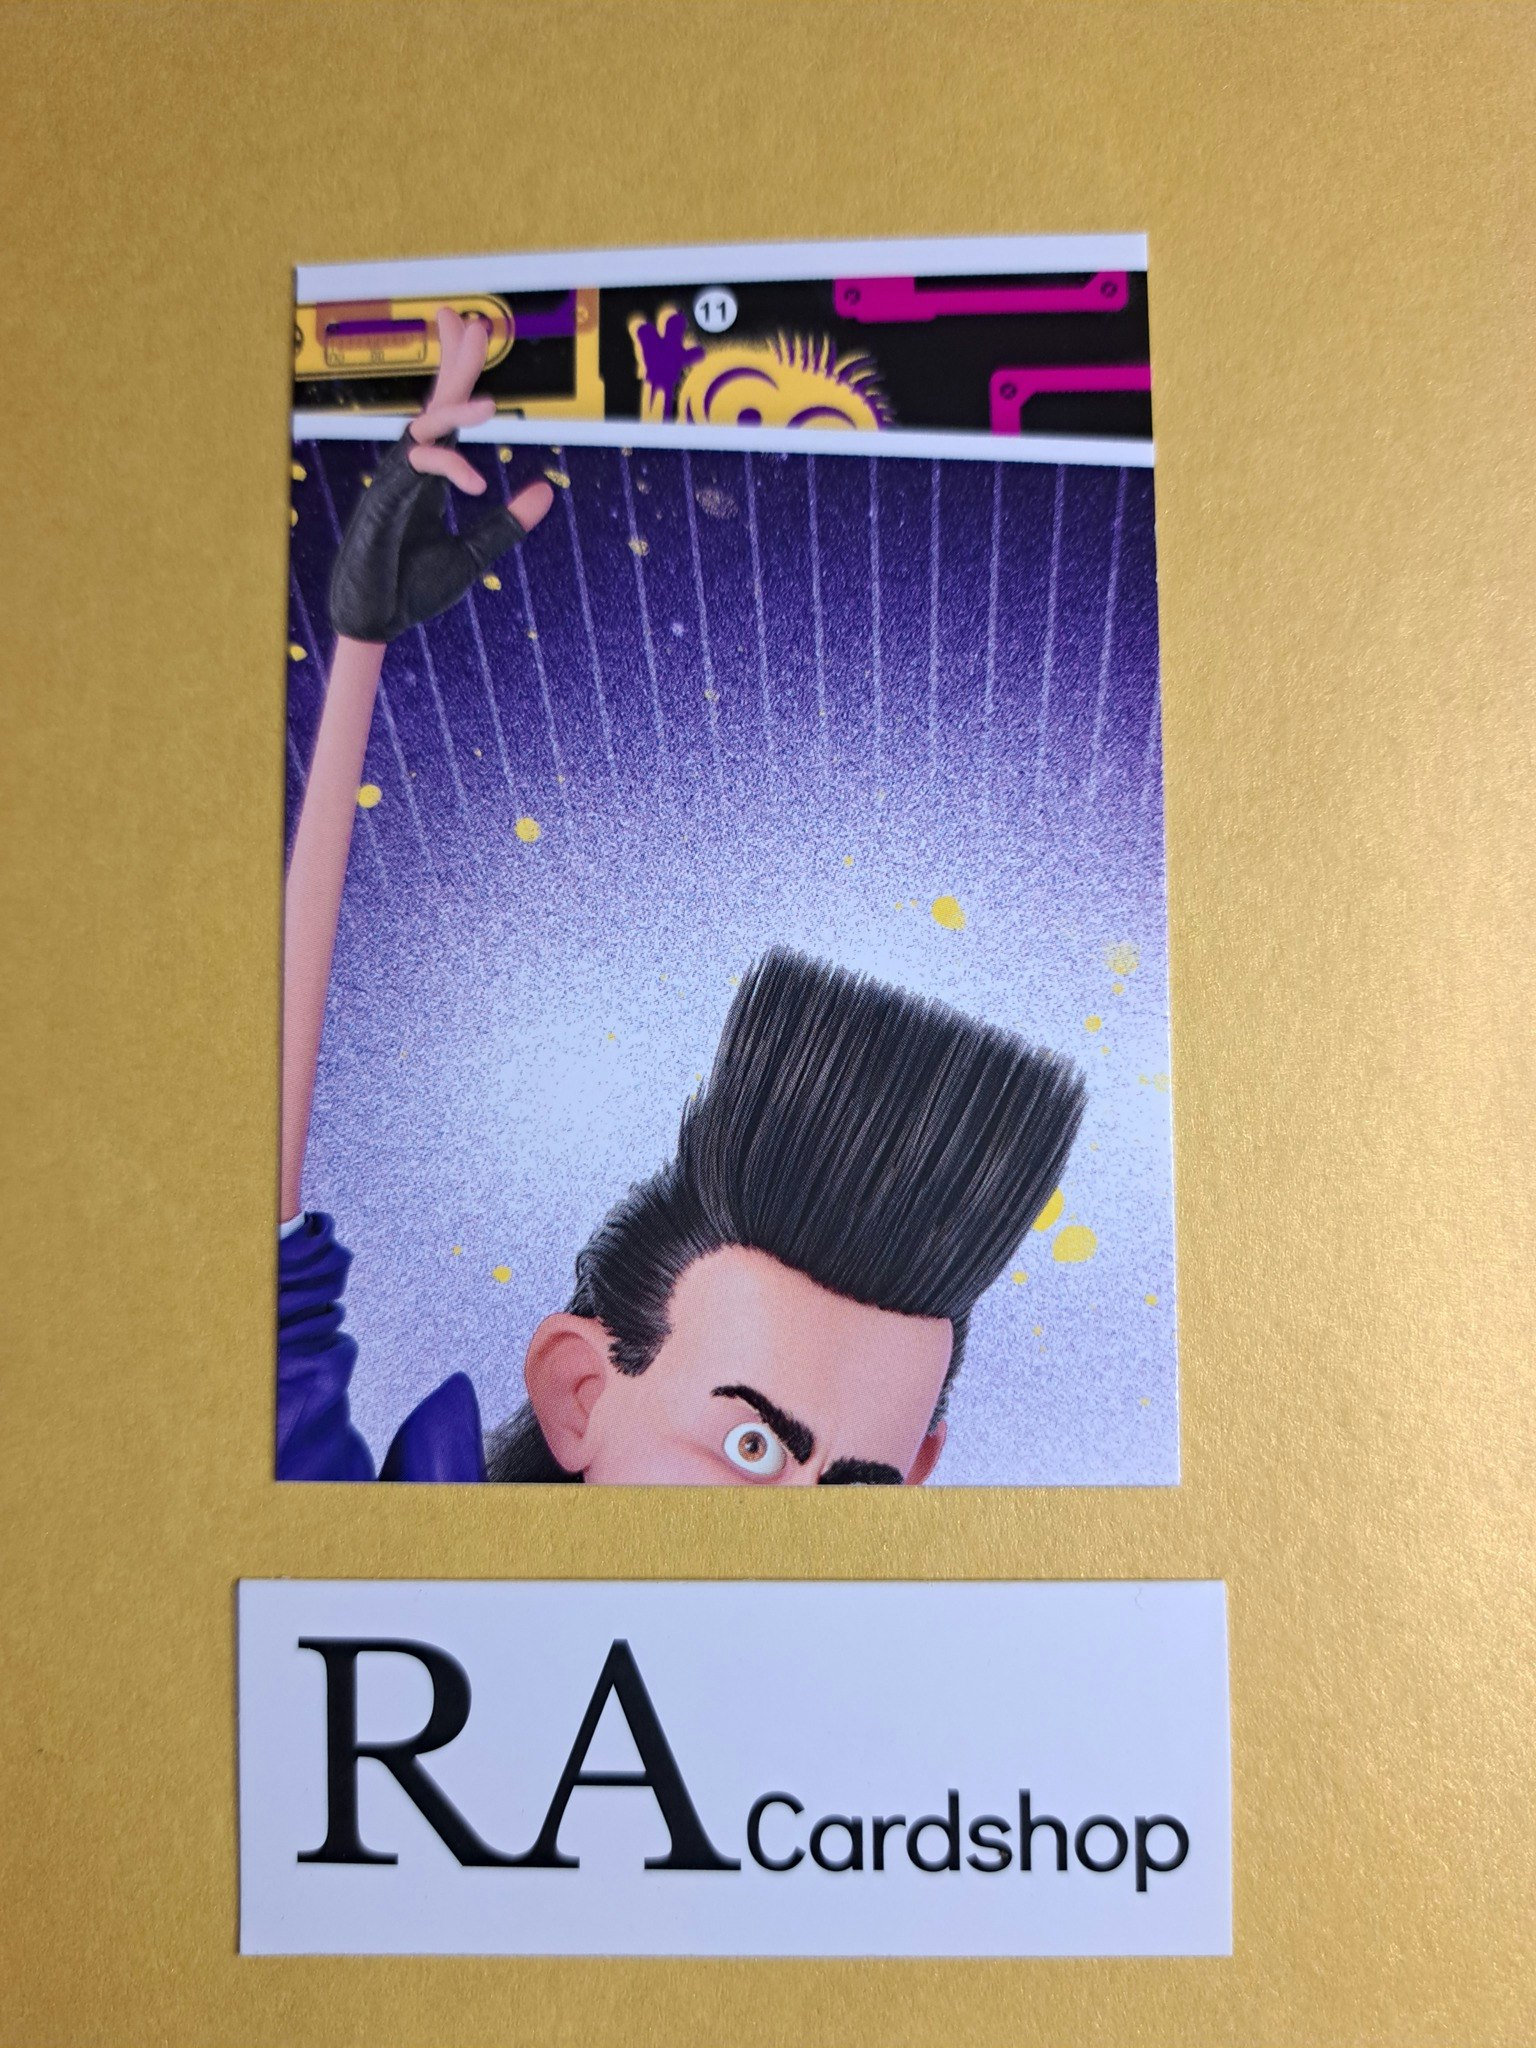 Puzzle #11 Despicable Me 3 Topps